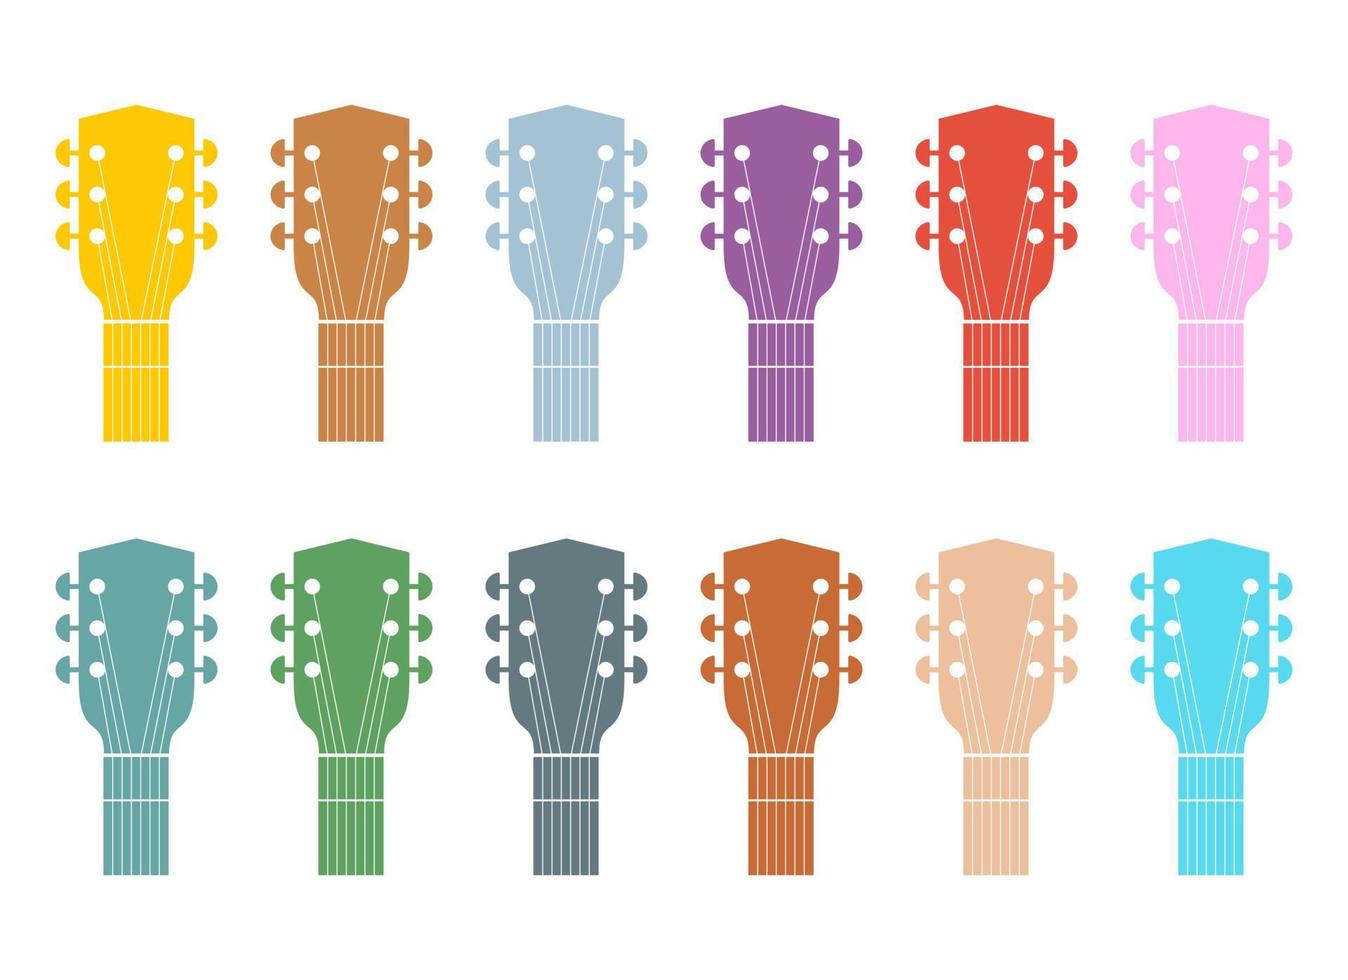 Guitar head vector design illustration isolated on white background